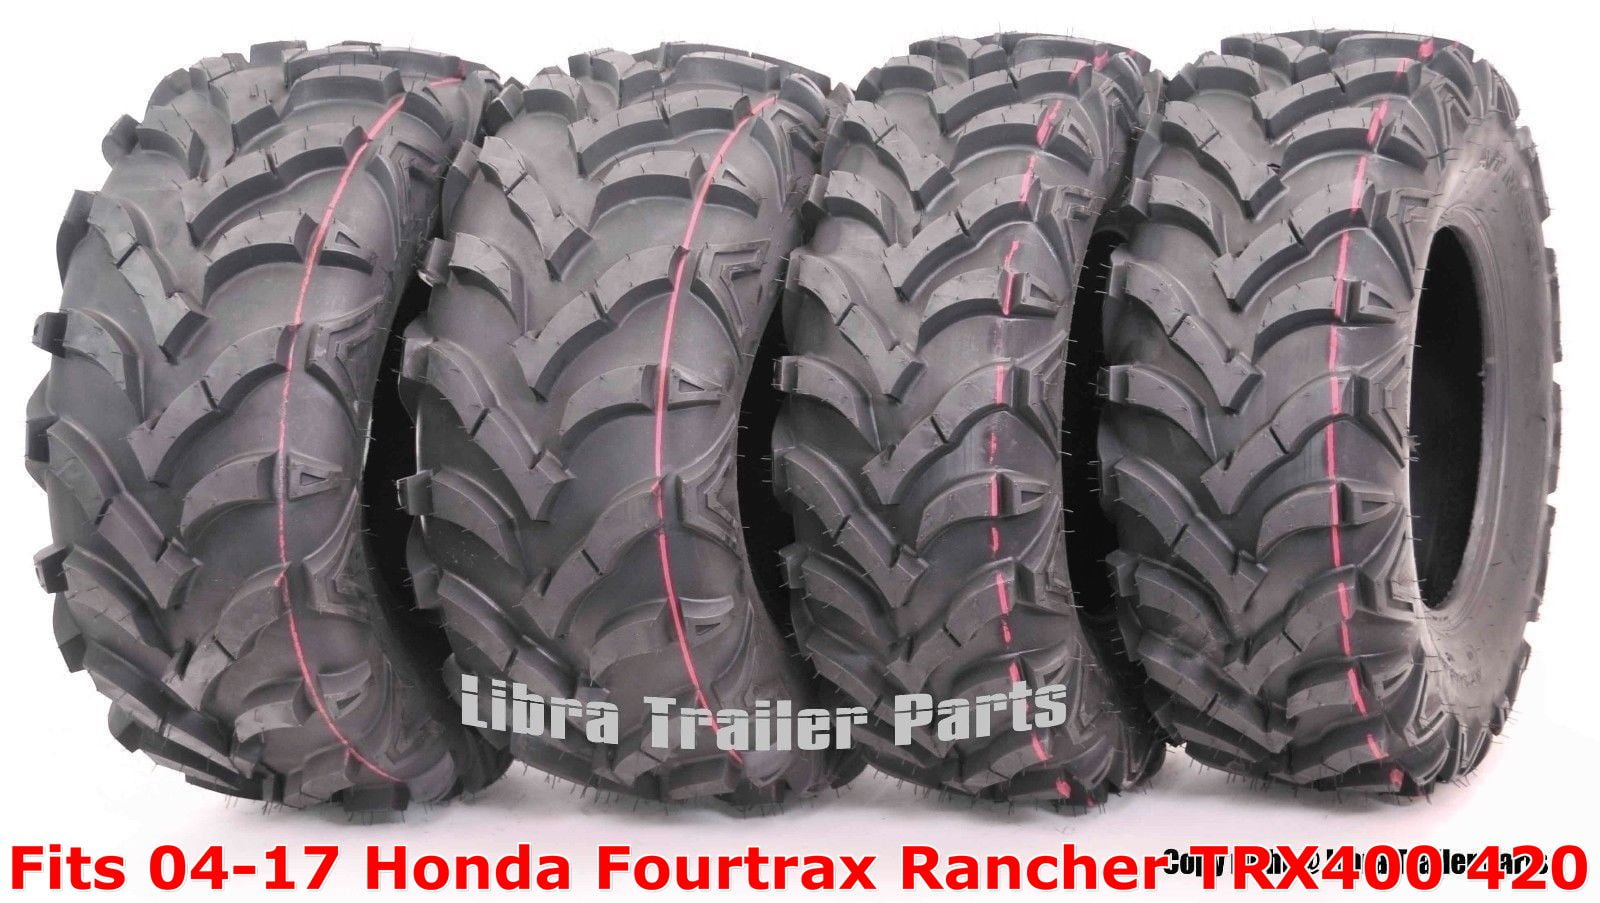 Mud Force Tire 24x10-11 for Honda Rancher 420 AT 4x4 IRS 2009-2014 